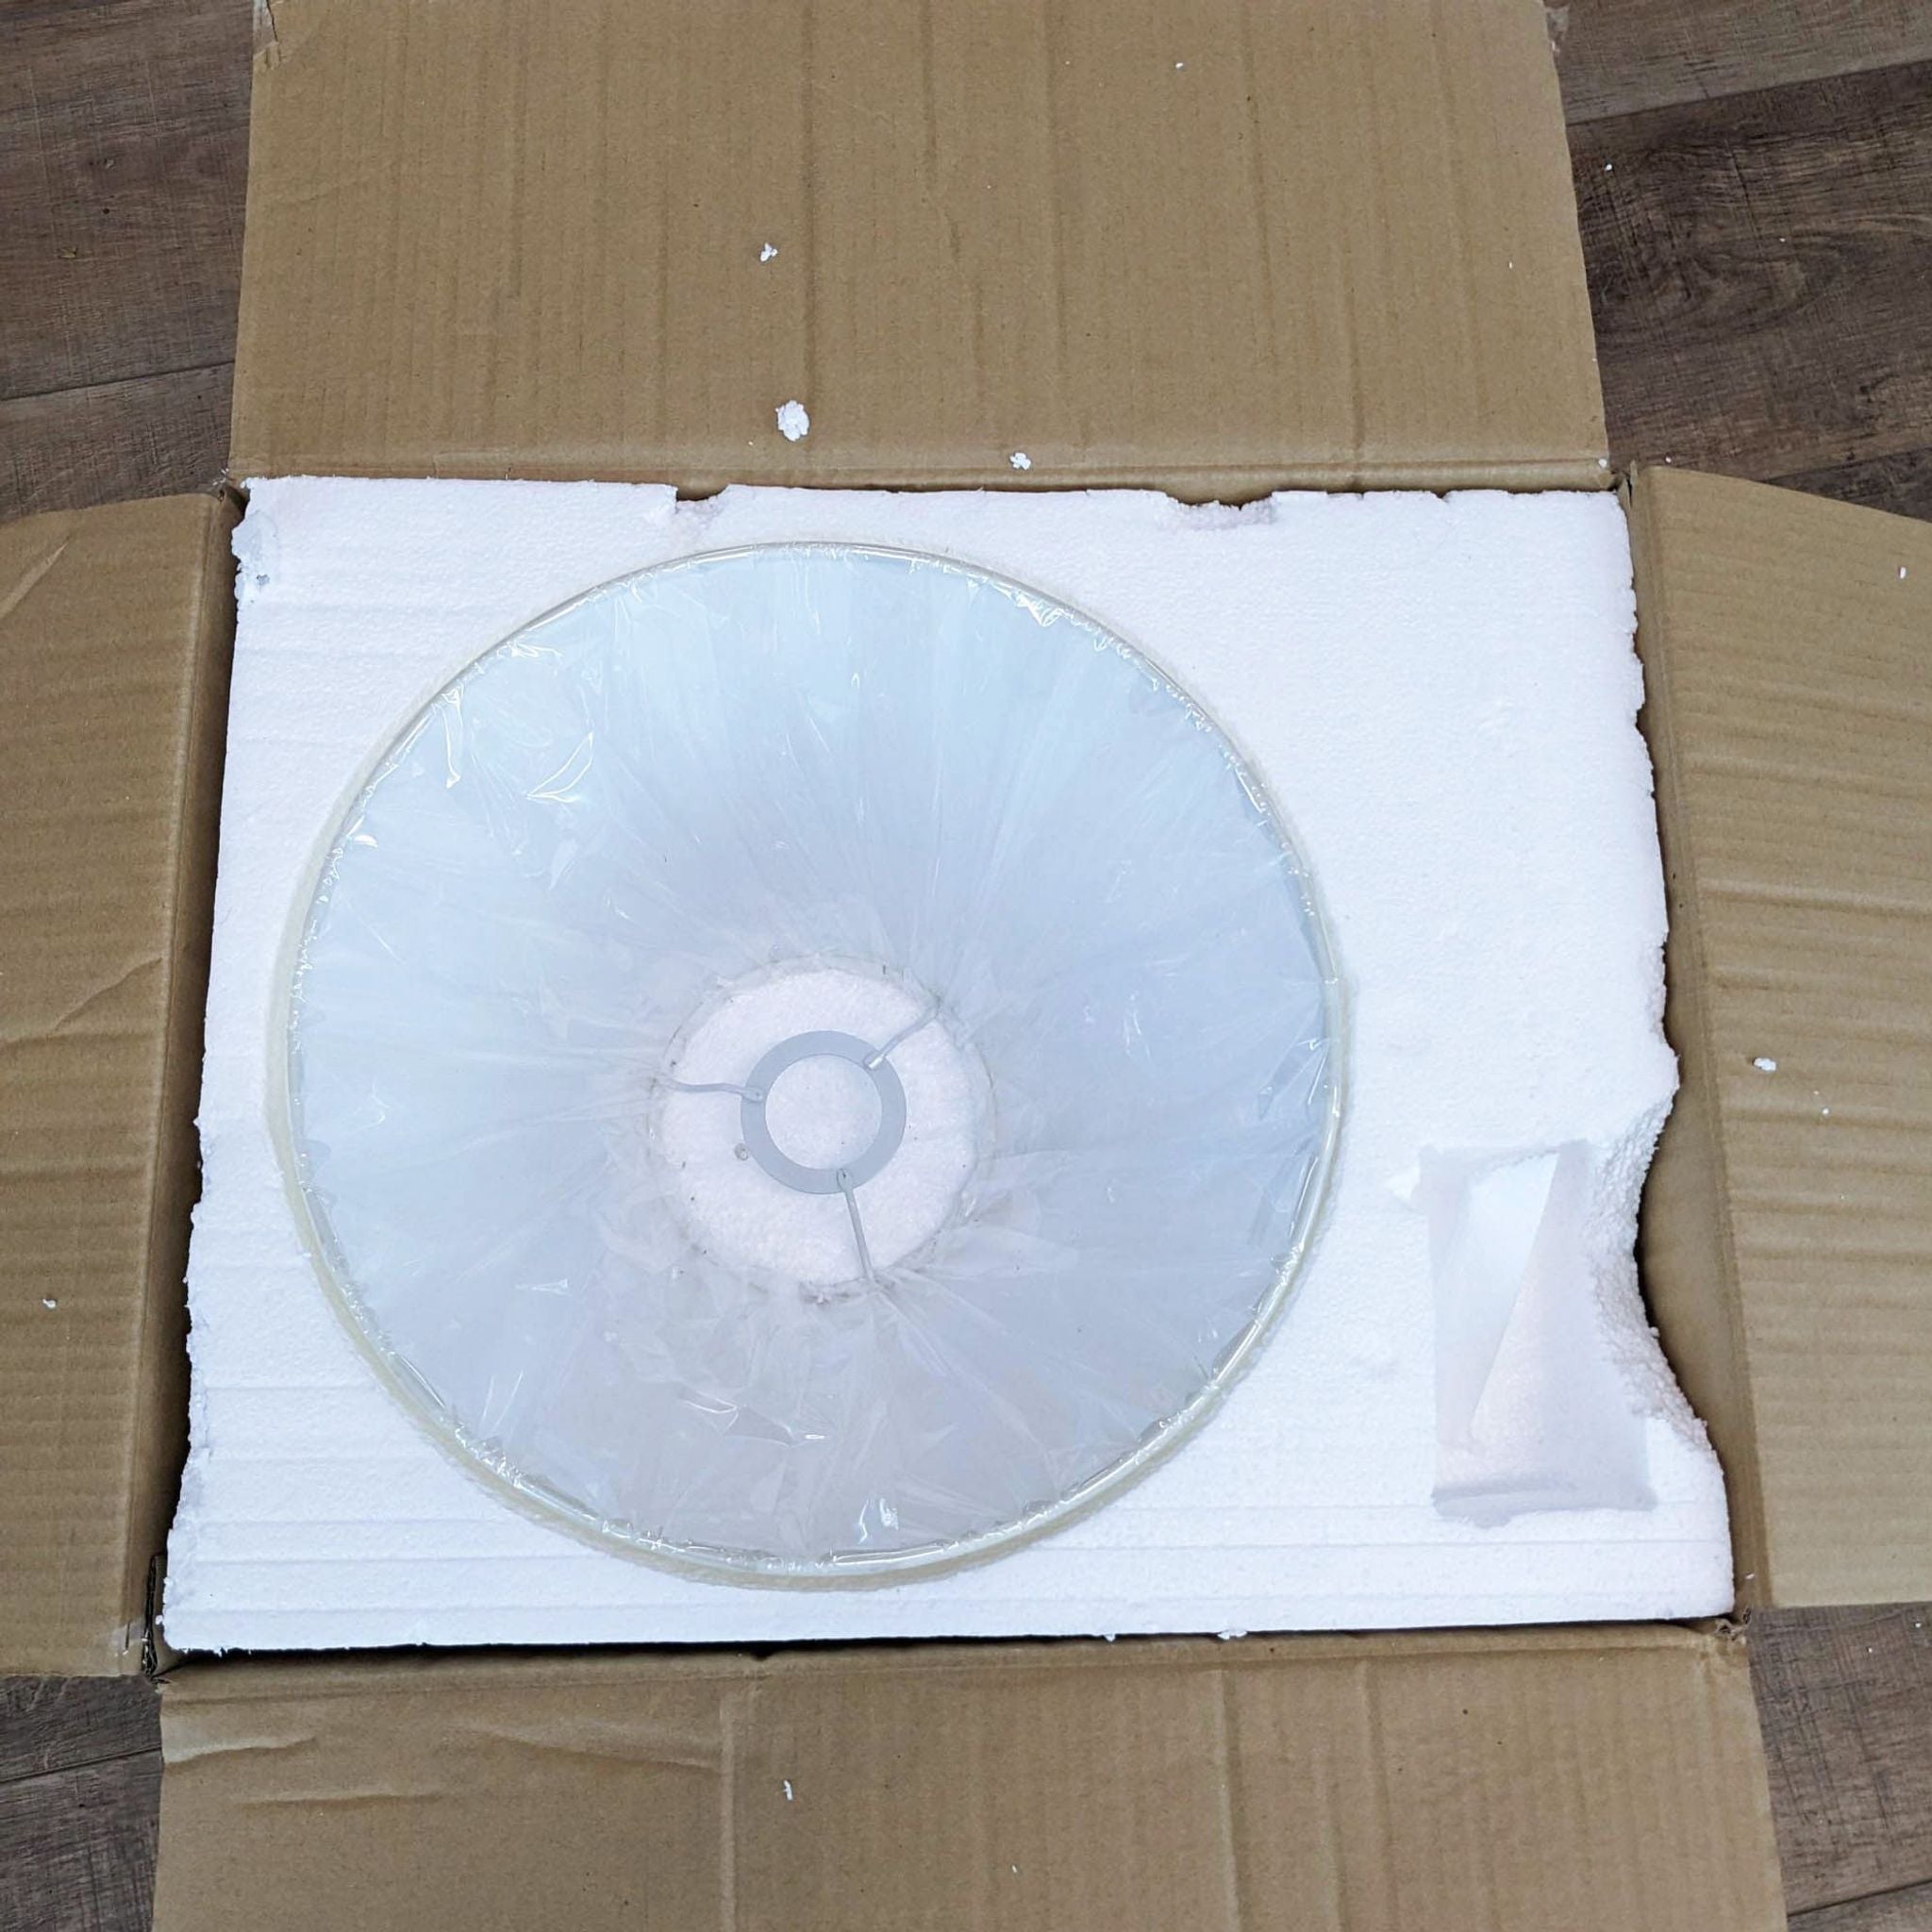 Round lampshade wrapped in plastic, part of a Ralph Lauren light by Visual Comfort, unpacked on cardboard.